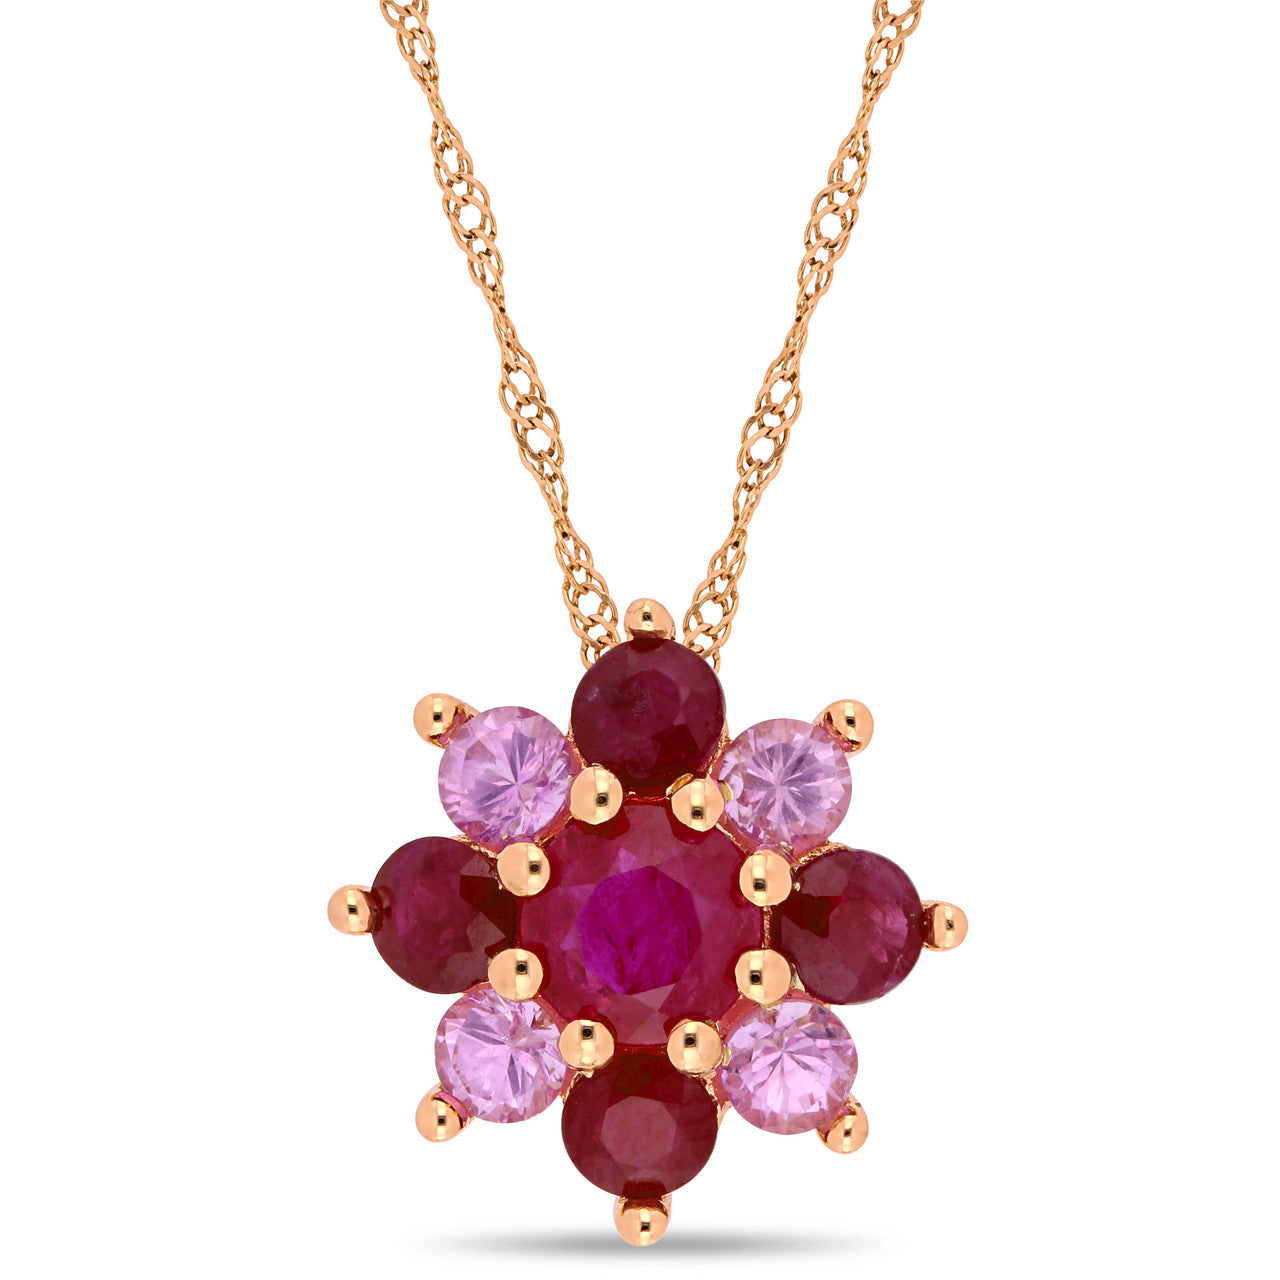 Ice Jewellery 1 4/5 CT TGW Ruby-CN Ruby Pink Sapphire Fashion Pendant With Chain in 14k Pink Gold - 75000004895 | Ice Jewellery Australia